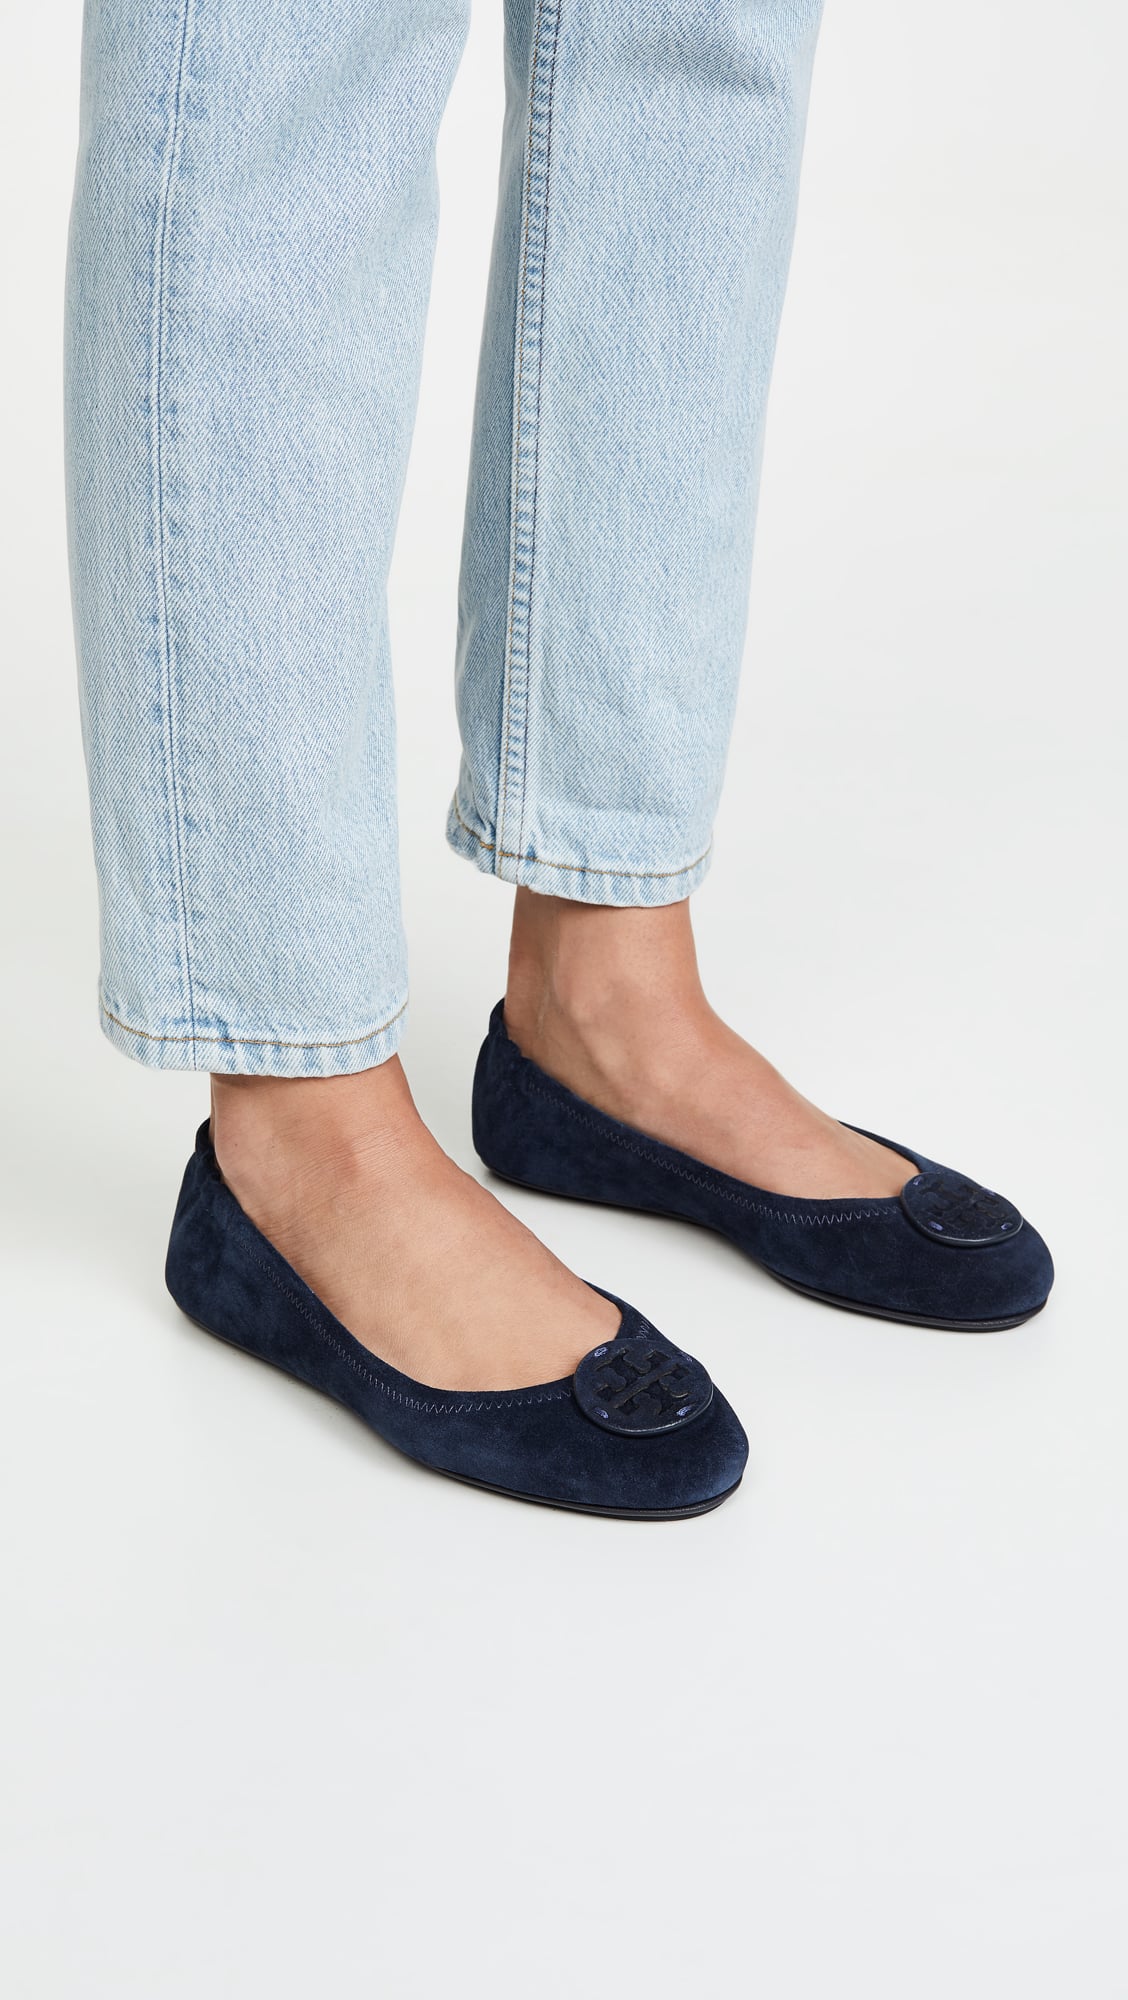 Tory Burch Minnie Travel Ballet Flats | From Chanel Bags to Slippers, These  Are the Best 50+ Gifts on Shopbop This Year | POPSUGAR Fashion Photo 27